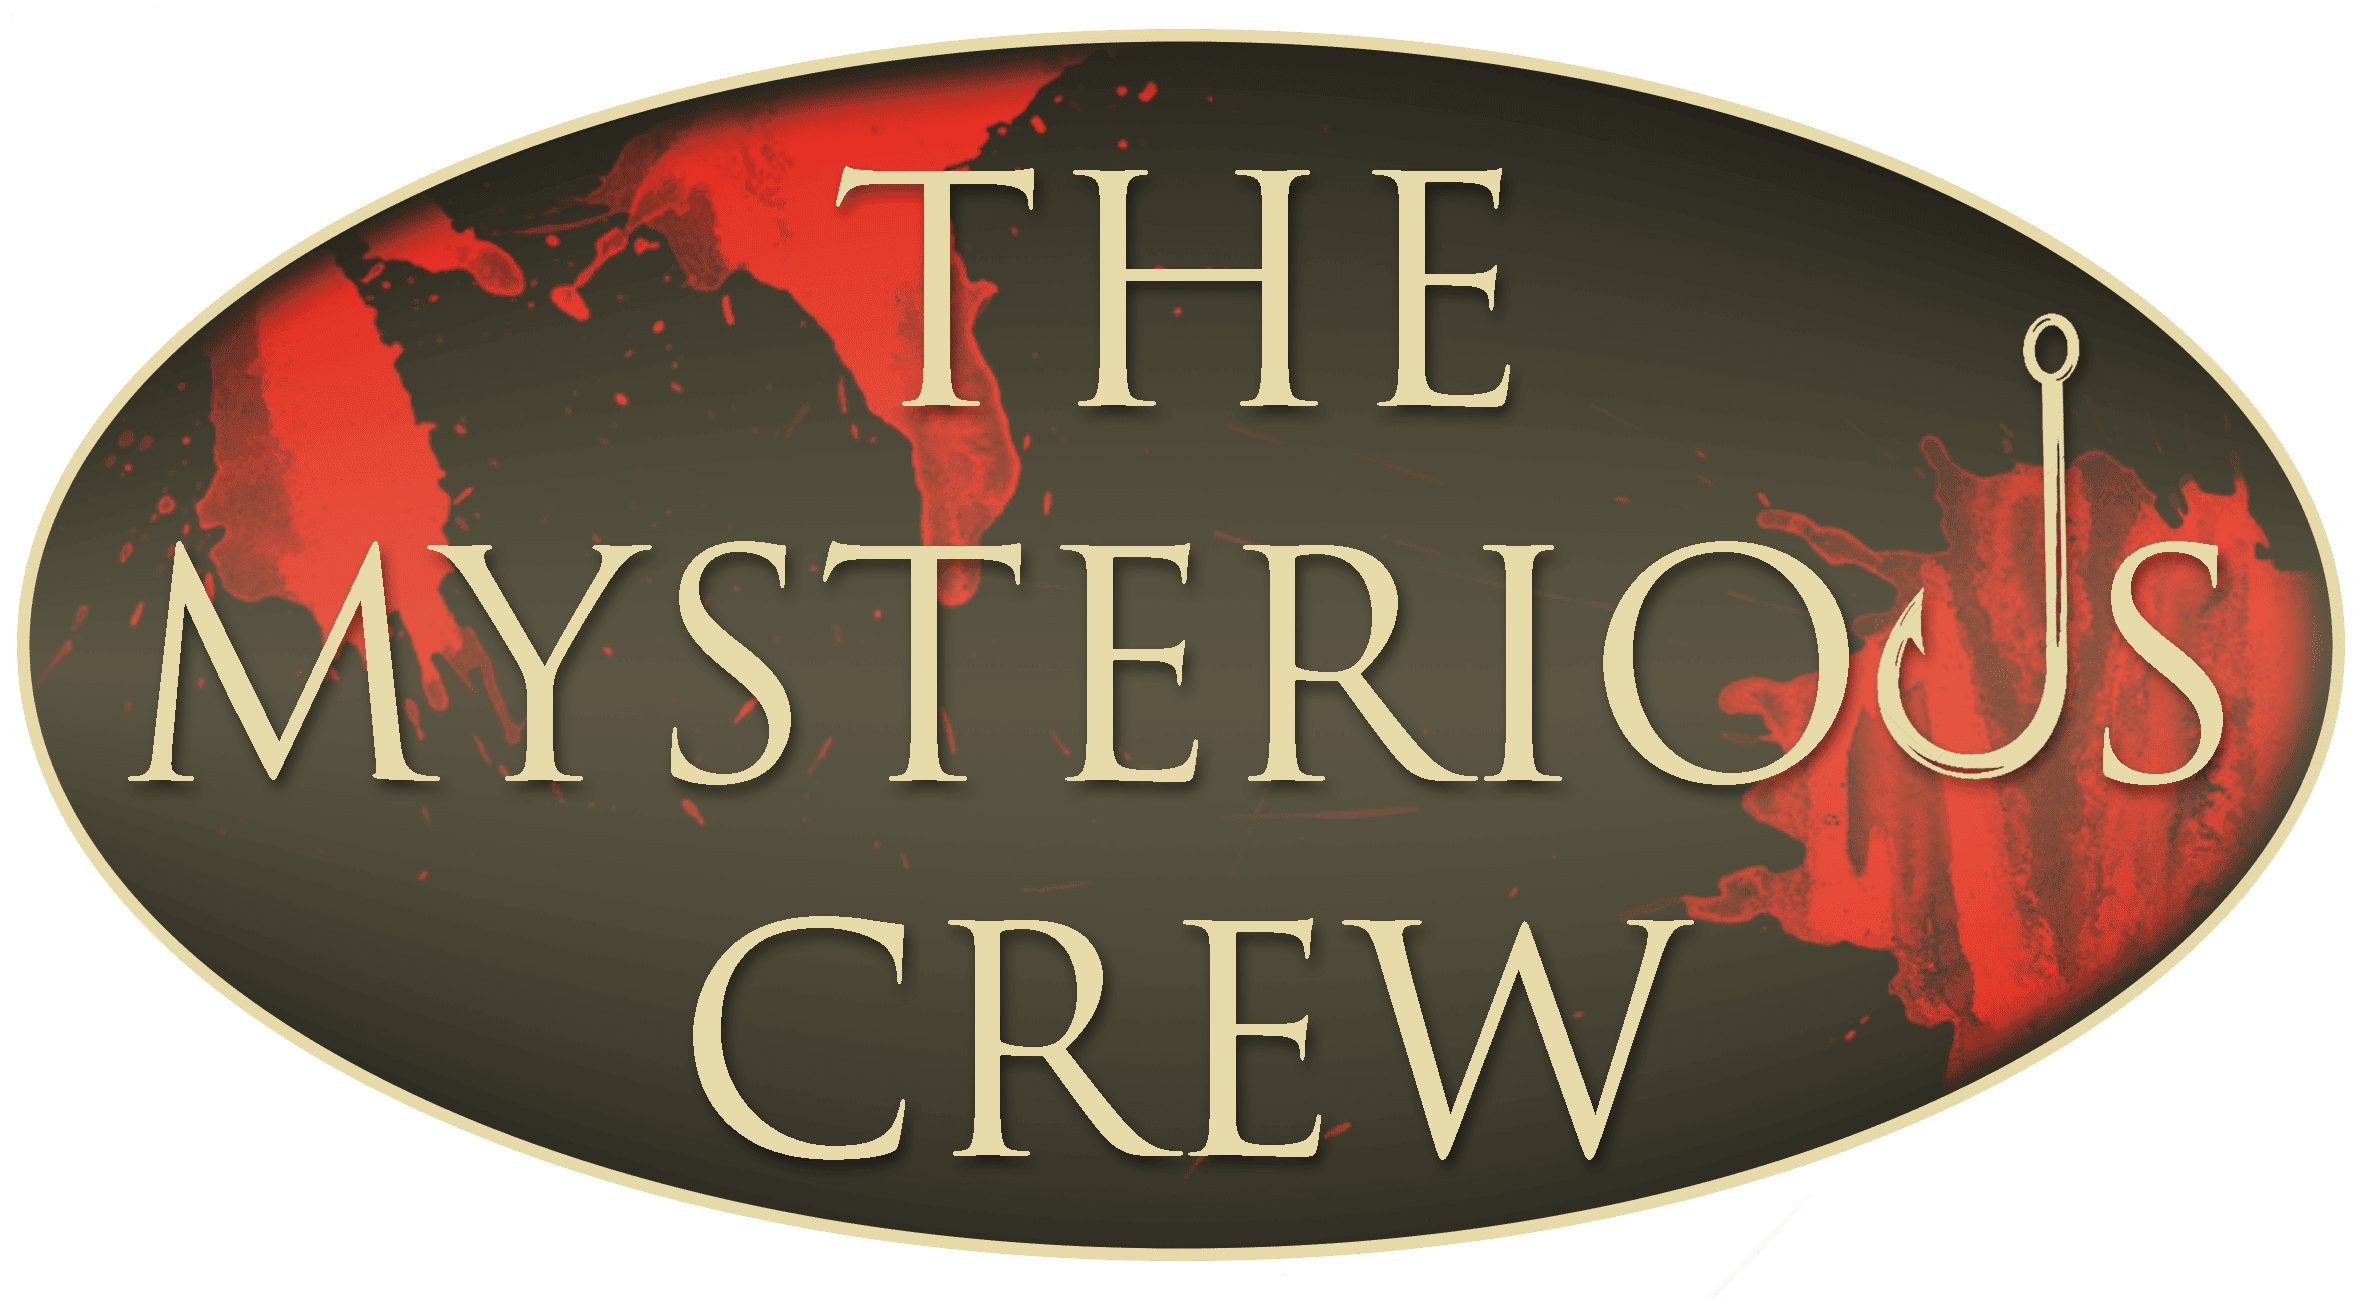 The Mysterious Crew